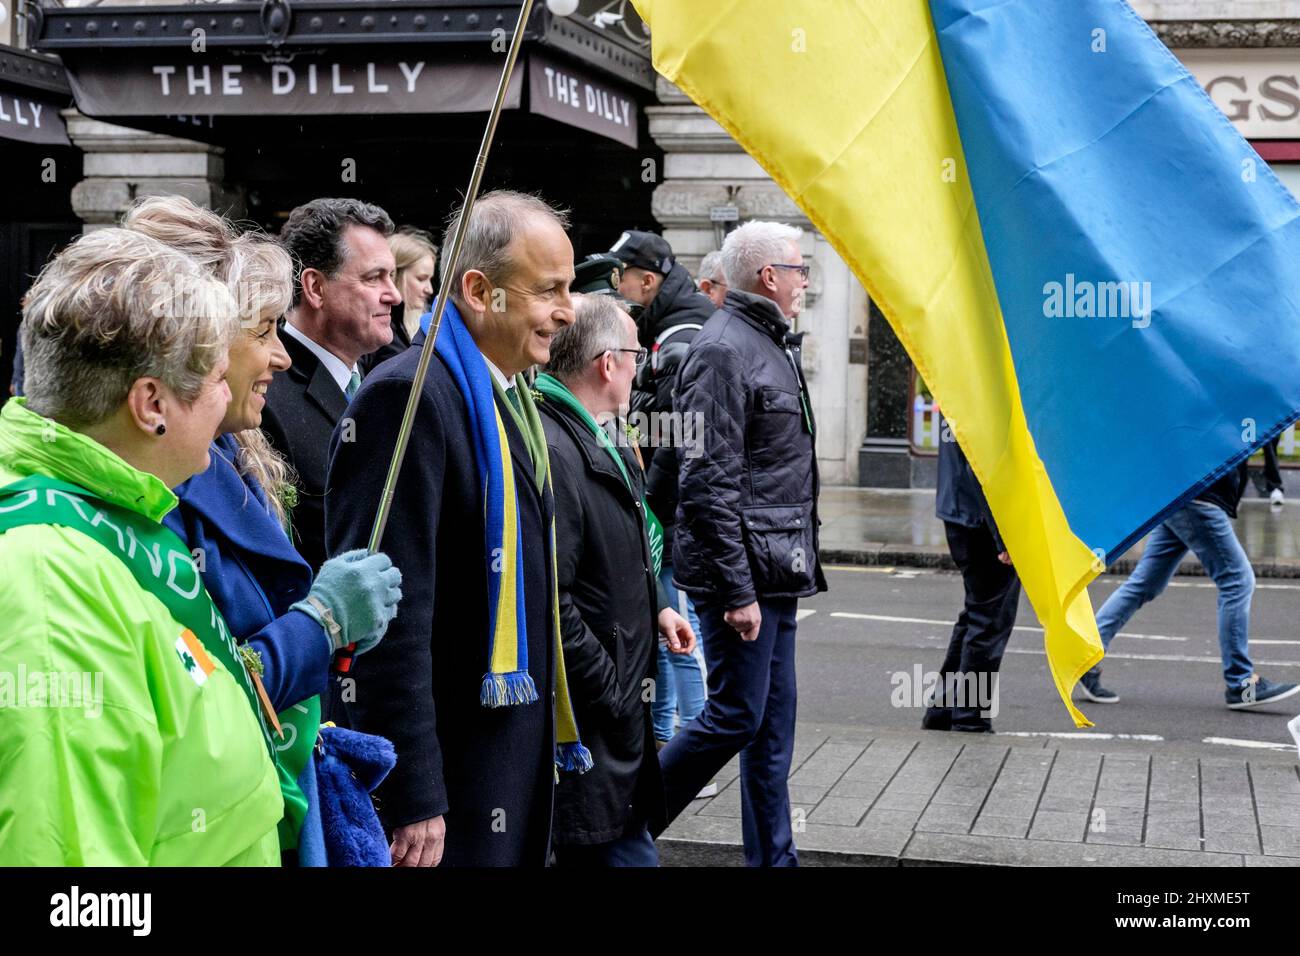 London, UK. 13th March 2022. The annual St Patrick's Day Parade returns to the capital after a two year hiatus due to the coronavirus pandemic. Irish premier Michael Martin joined in the event, wearing the colours of Ukraine and walking alongside its flag. The Taoiseach said he wanted show solidarity with the Ukrainian people. Stock Photo